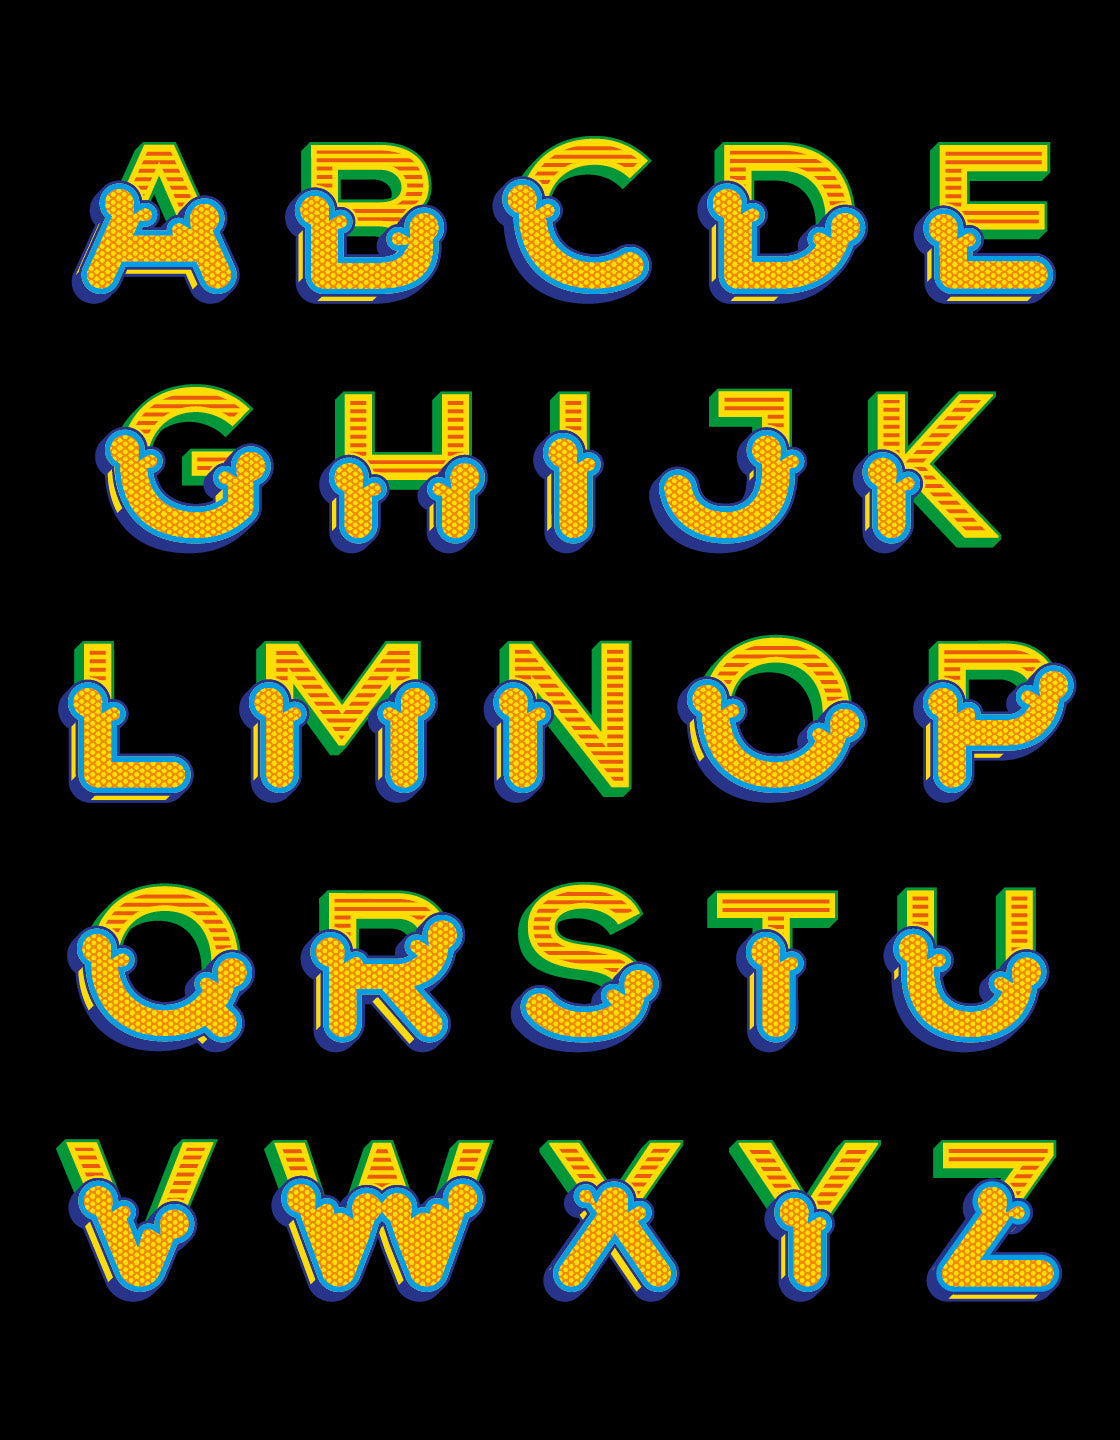 Full alphabet of custom circus font letters against a black background